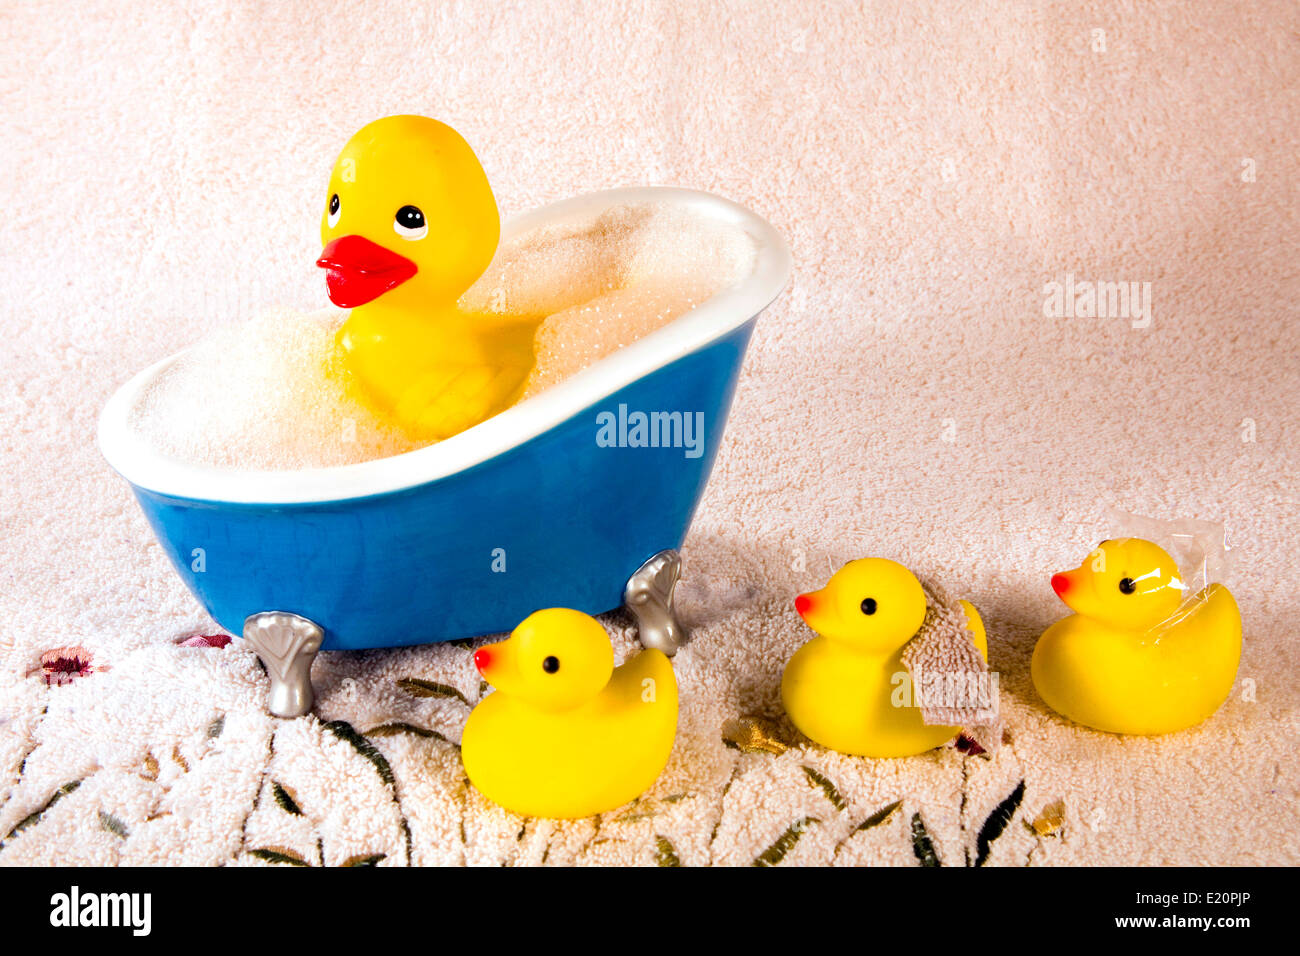 Large rubber duckie in bubble bath with three smaller ducks waiting on a terry cloth towel. Stock Photo